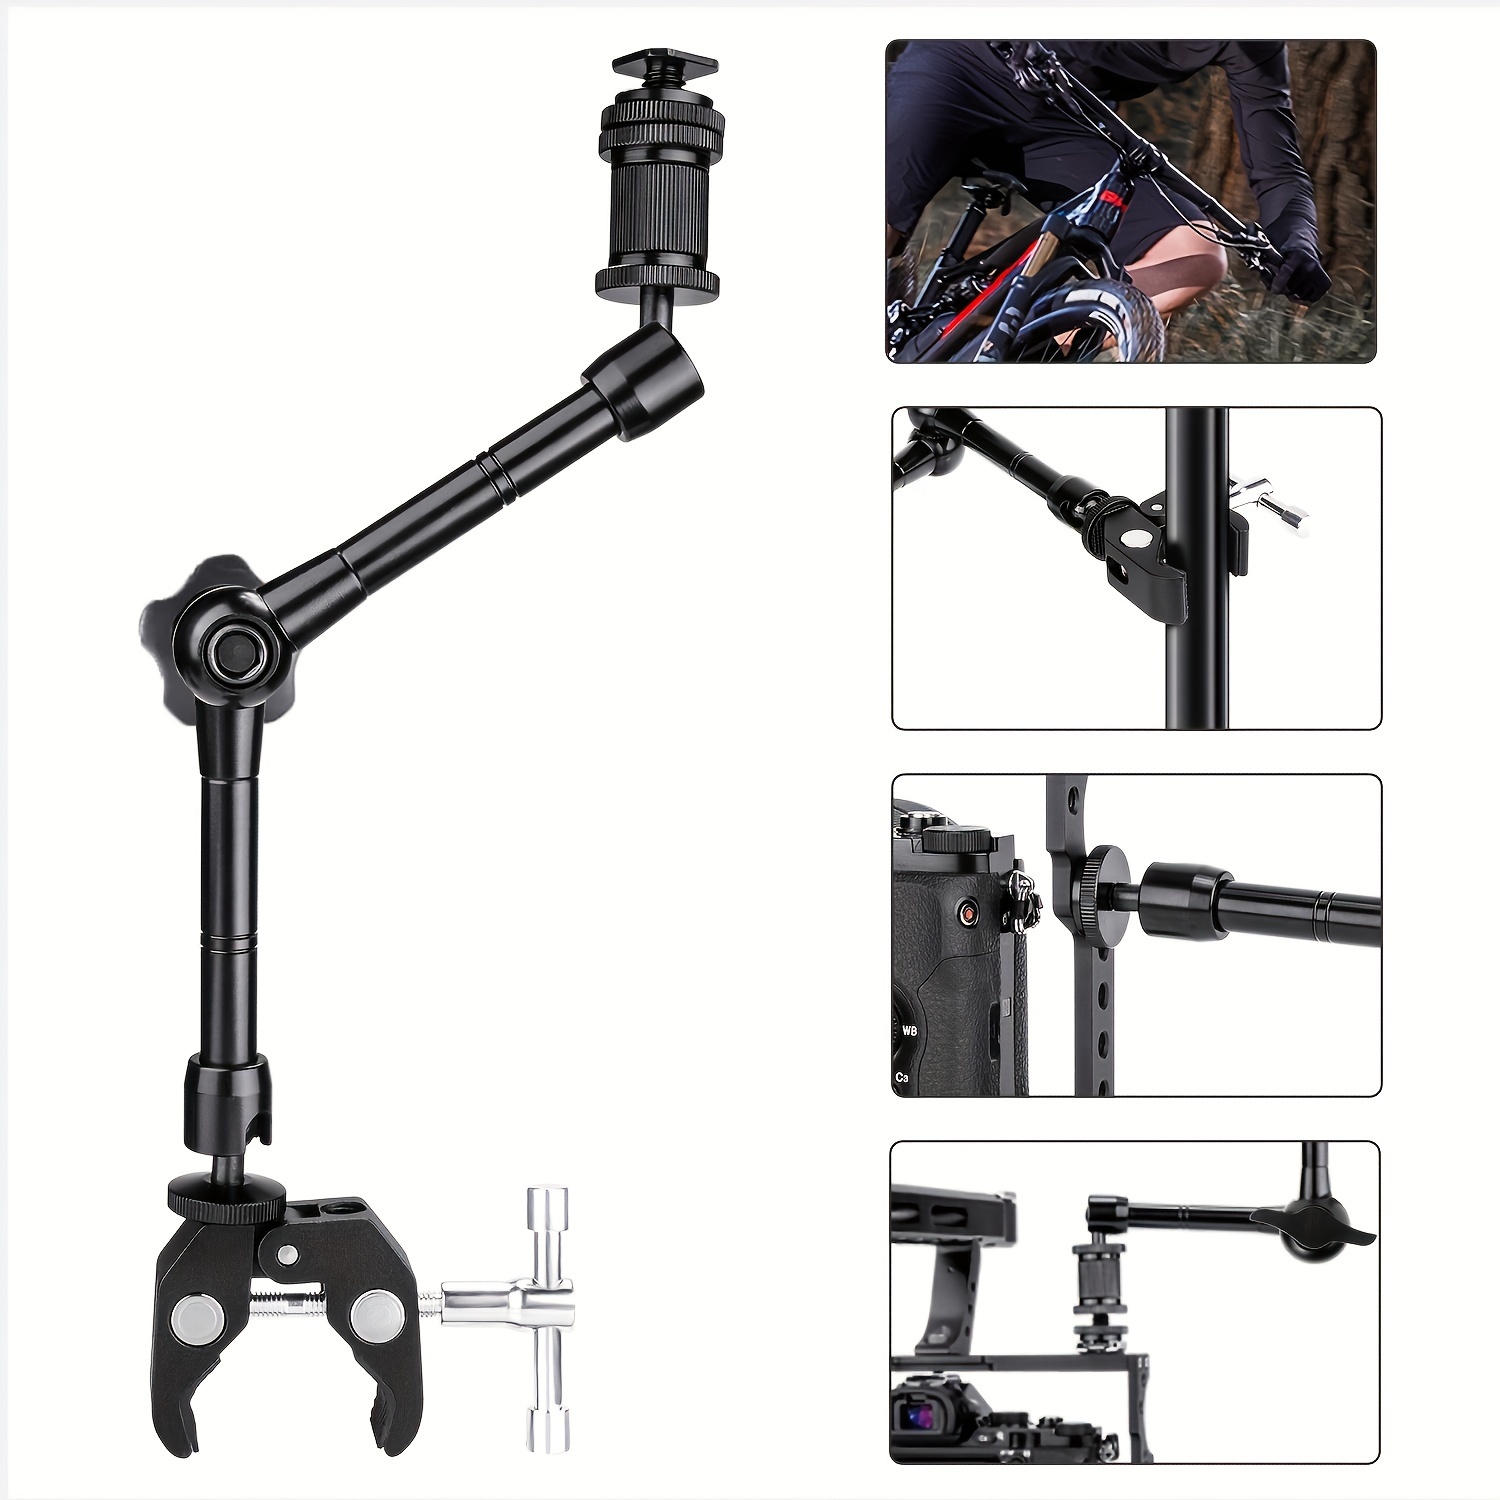 

11 Inch Articulating Magic Arm + Super Clamp For Dslr Rig Camera To Lcd Monito, Led Video Light